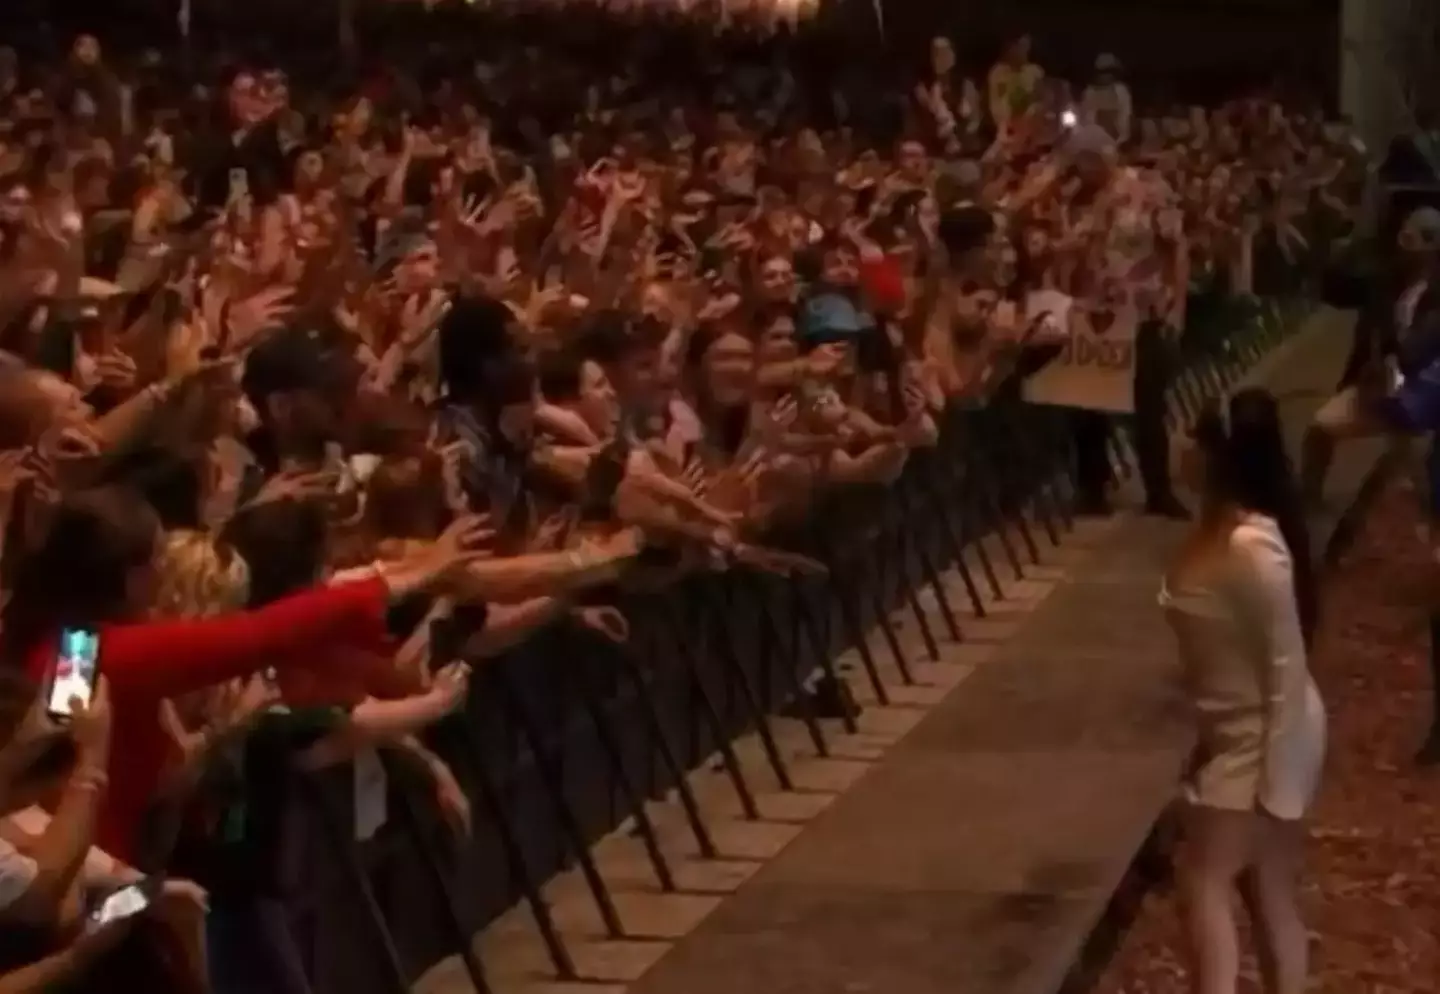 Lana Del Rey conducting her fans after the power was turned off at Glastonbury.